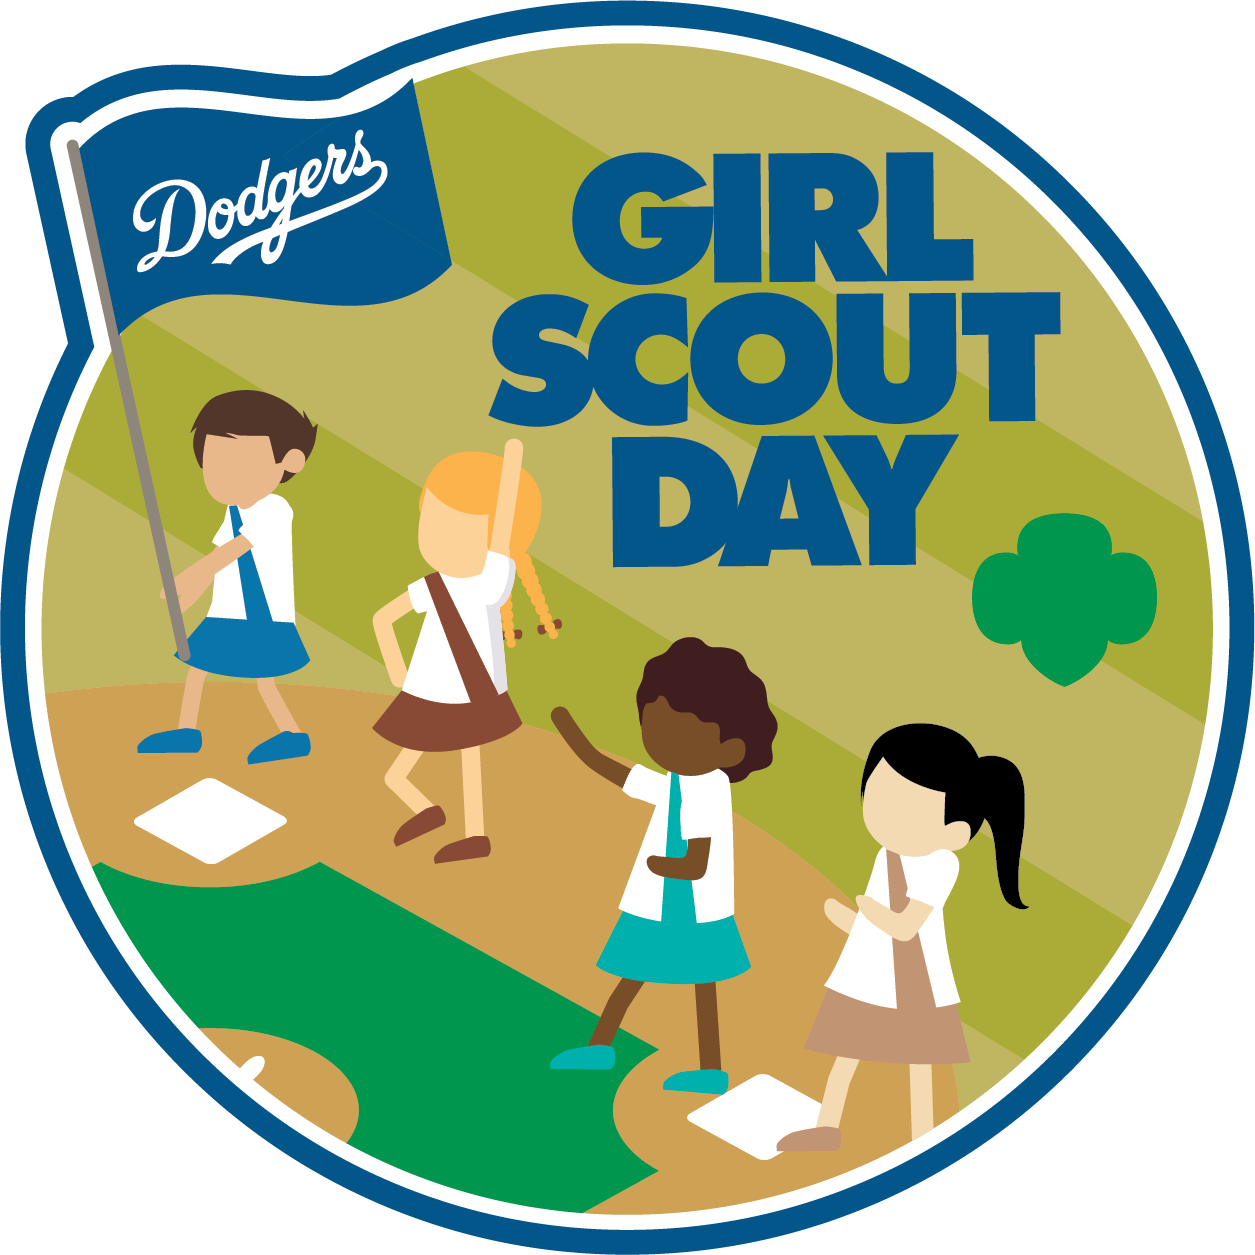 A Girls Scout Day Patch Will Be Offered When The Dodgers - Los Angeles Dodgers (1255x1255)